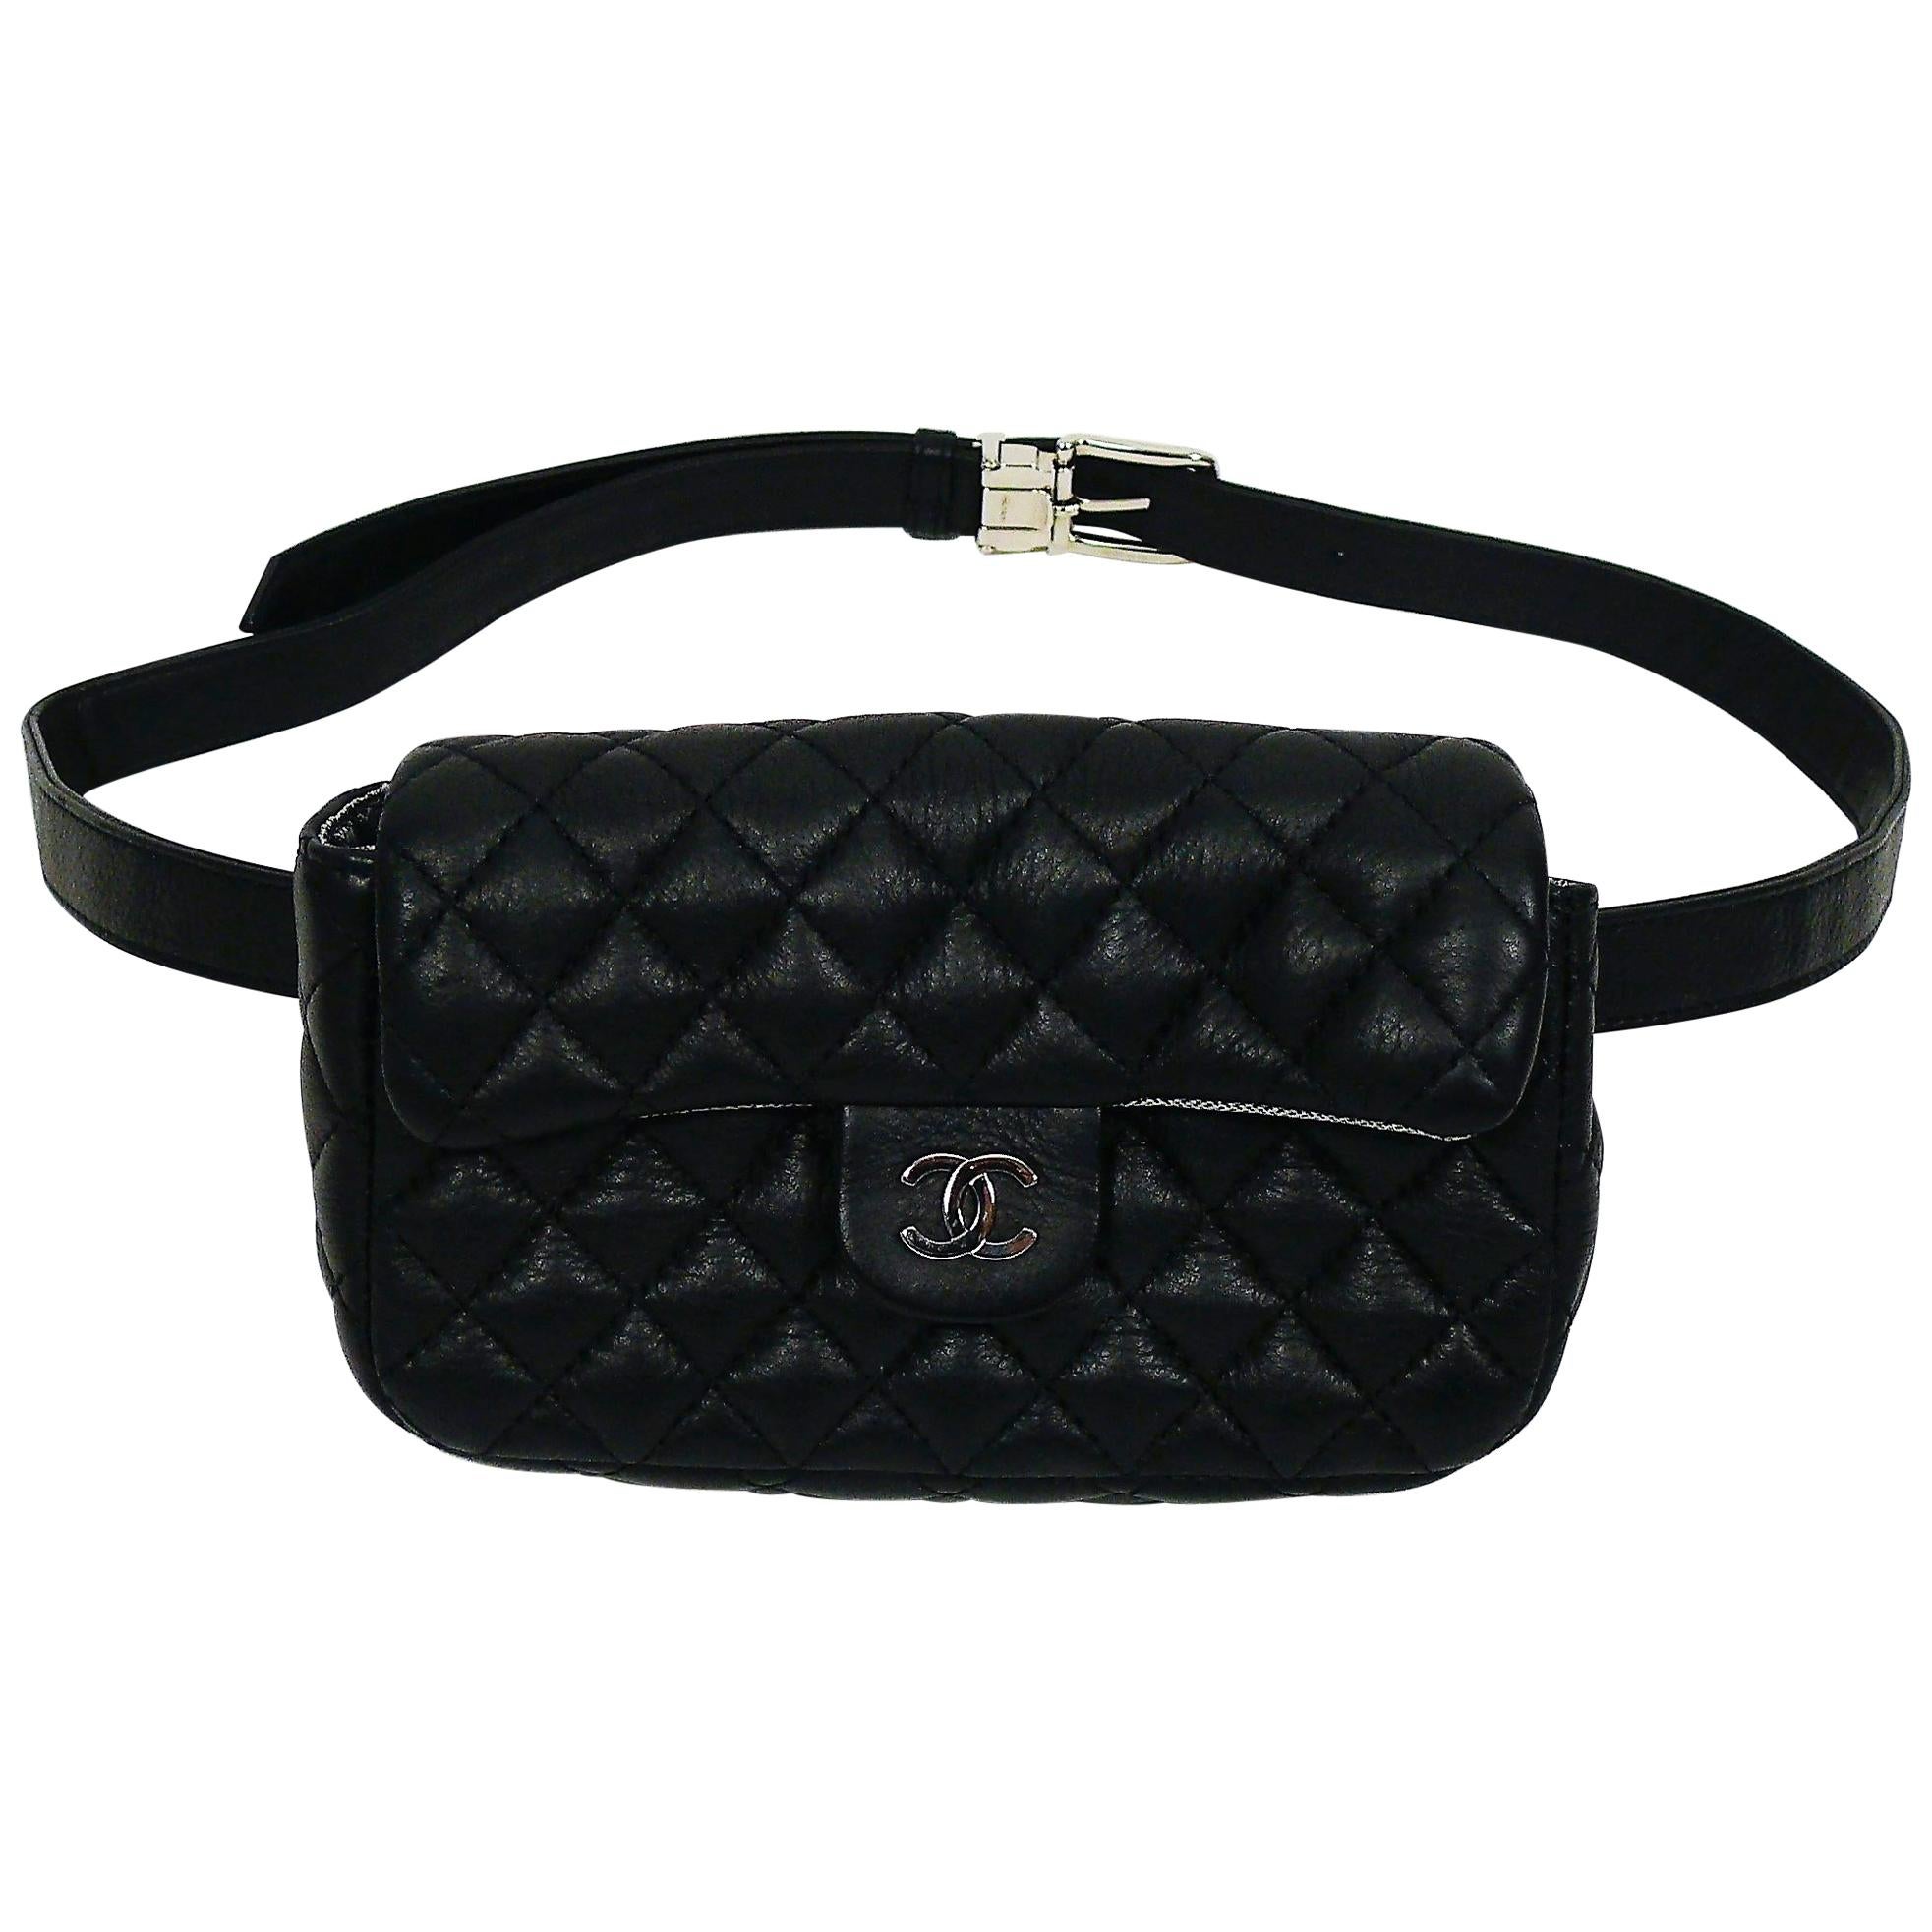 relovedeluxe products-Chanel Caviar Black Clutch Bag-RELOVE DELUXE